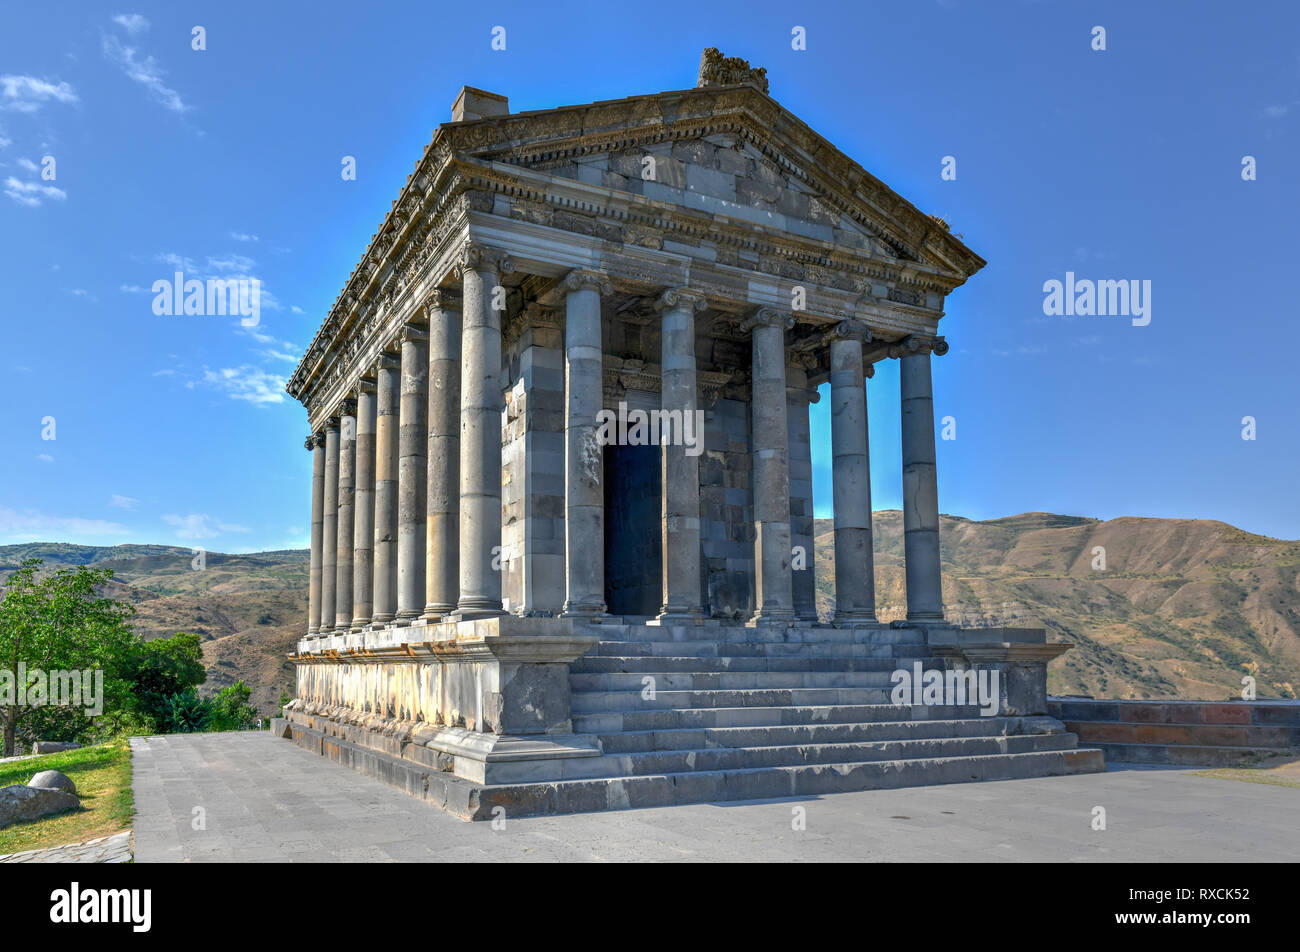 Création de votre Sanctuaire Temple-of-garni-an-ionic-pagan-temple-located-in-the-village-of-garni-armenia-it-is-the-best-known-structure-and-symbol-of-pre-christian-armenia-RXCK52